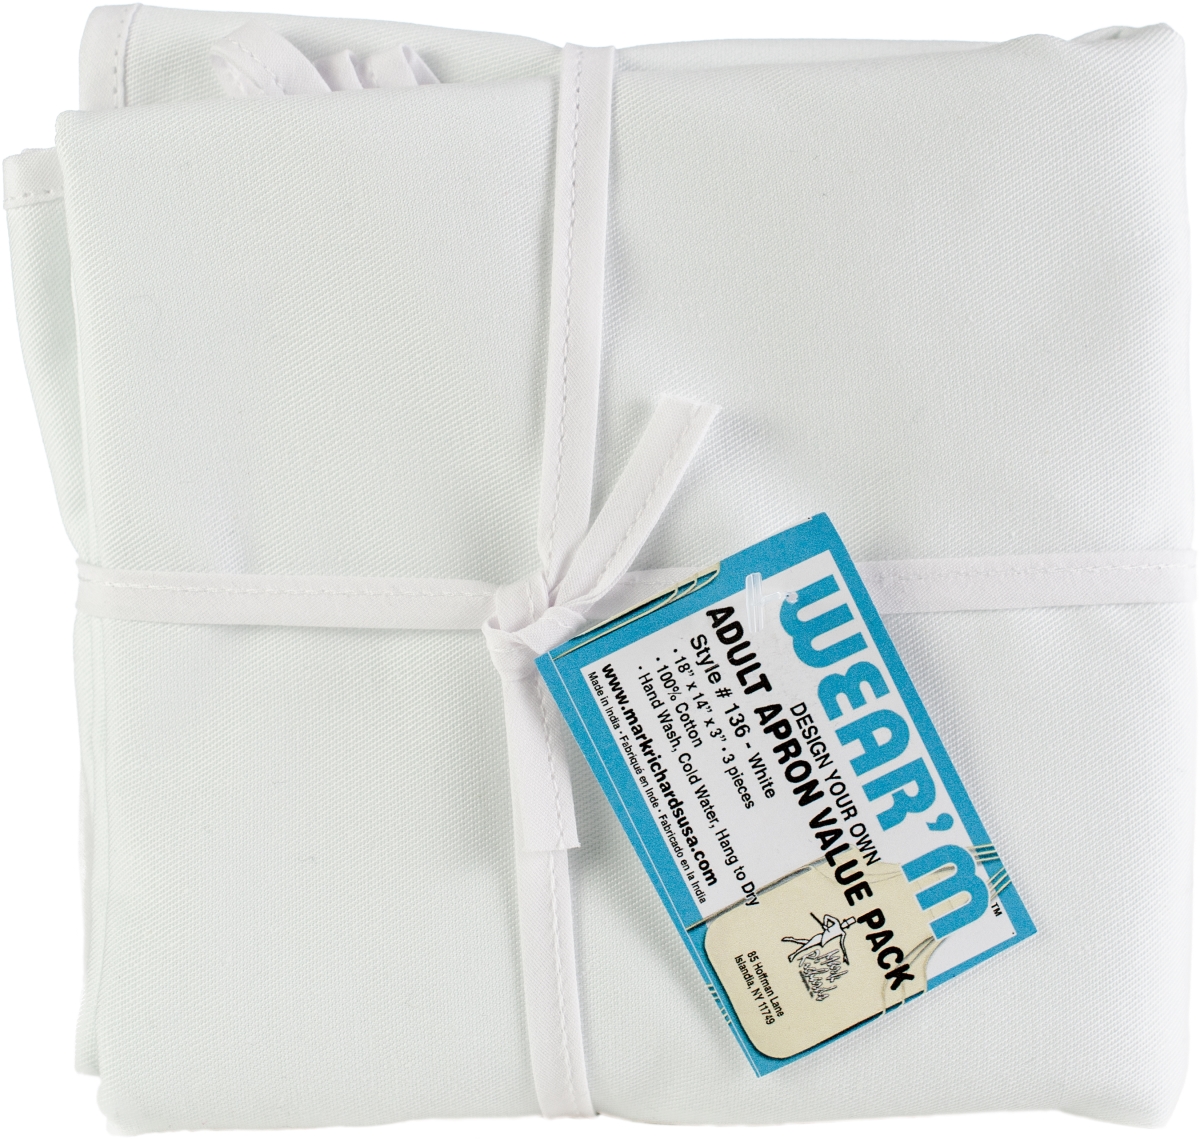 Mraav-136 12 X 19 In. White Adult Apron Value Pack